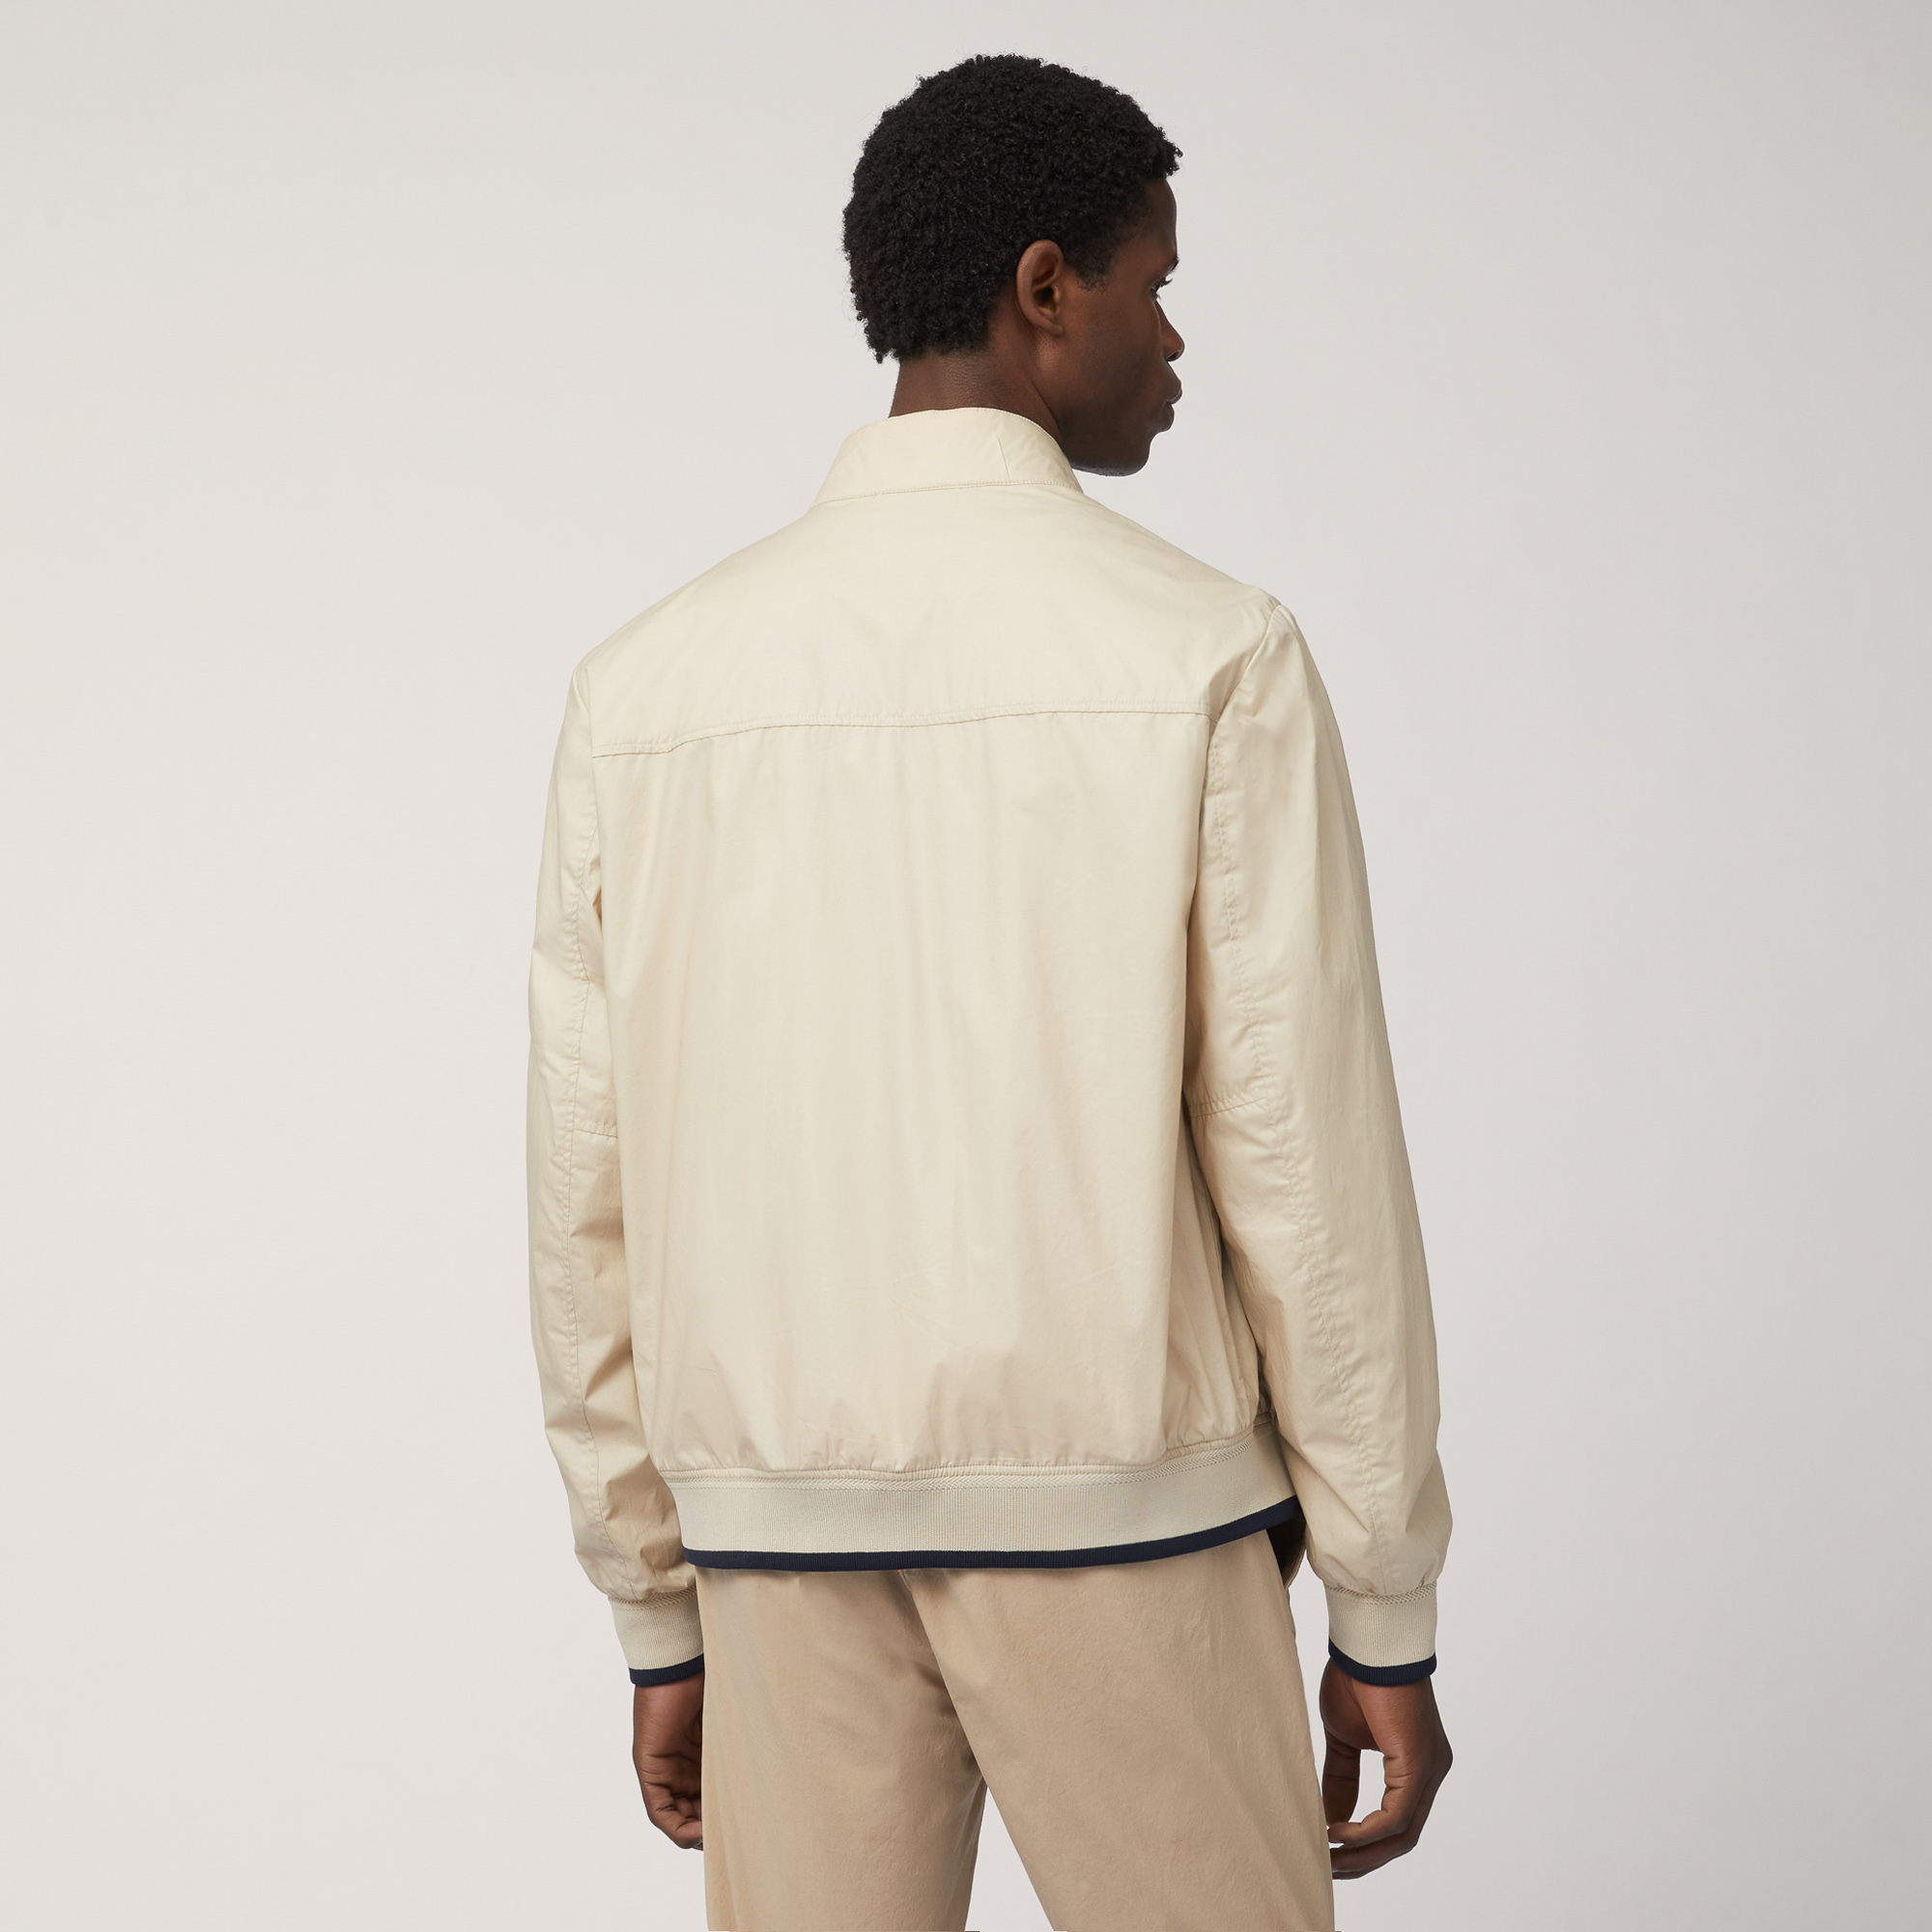 Paper Touch Effect Bomber Jacket, Beige, large image number 1